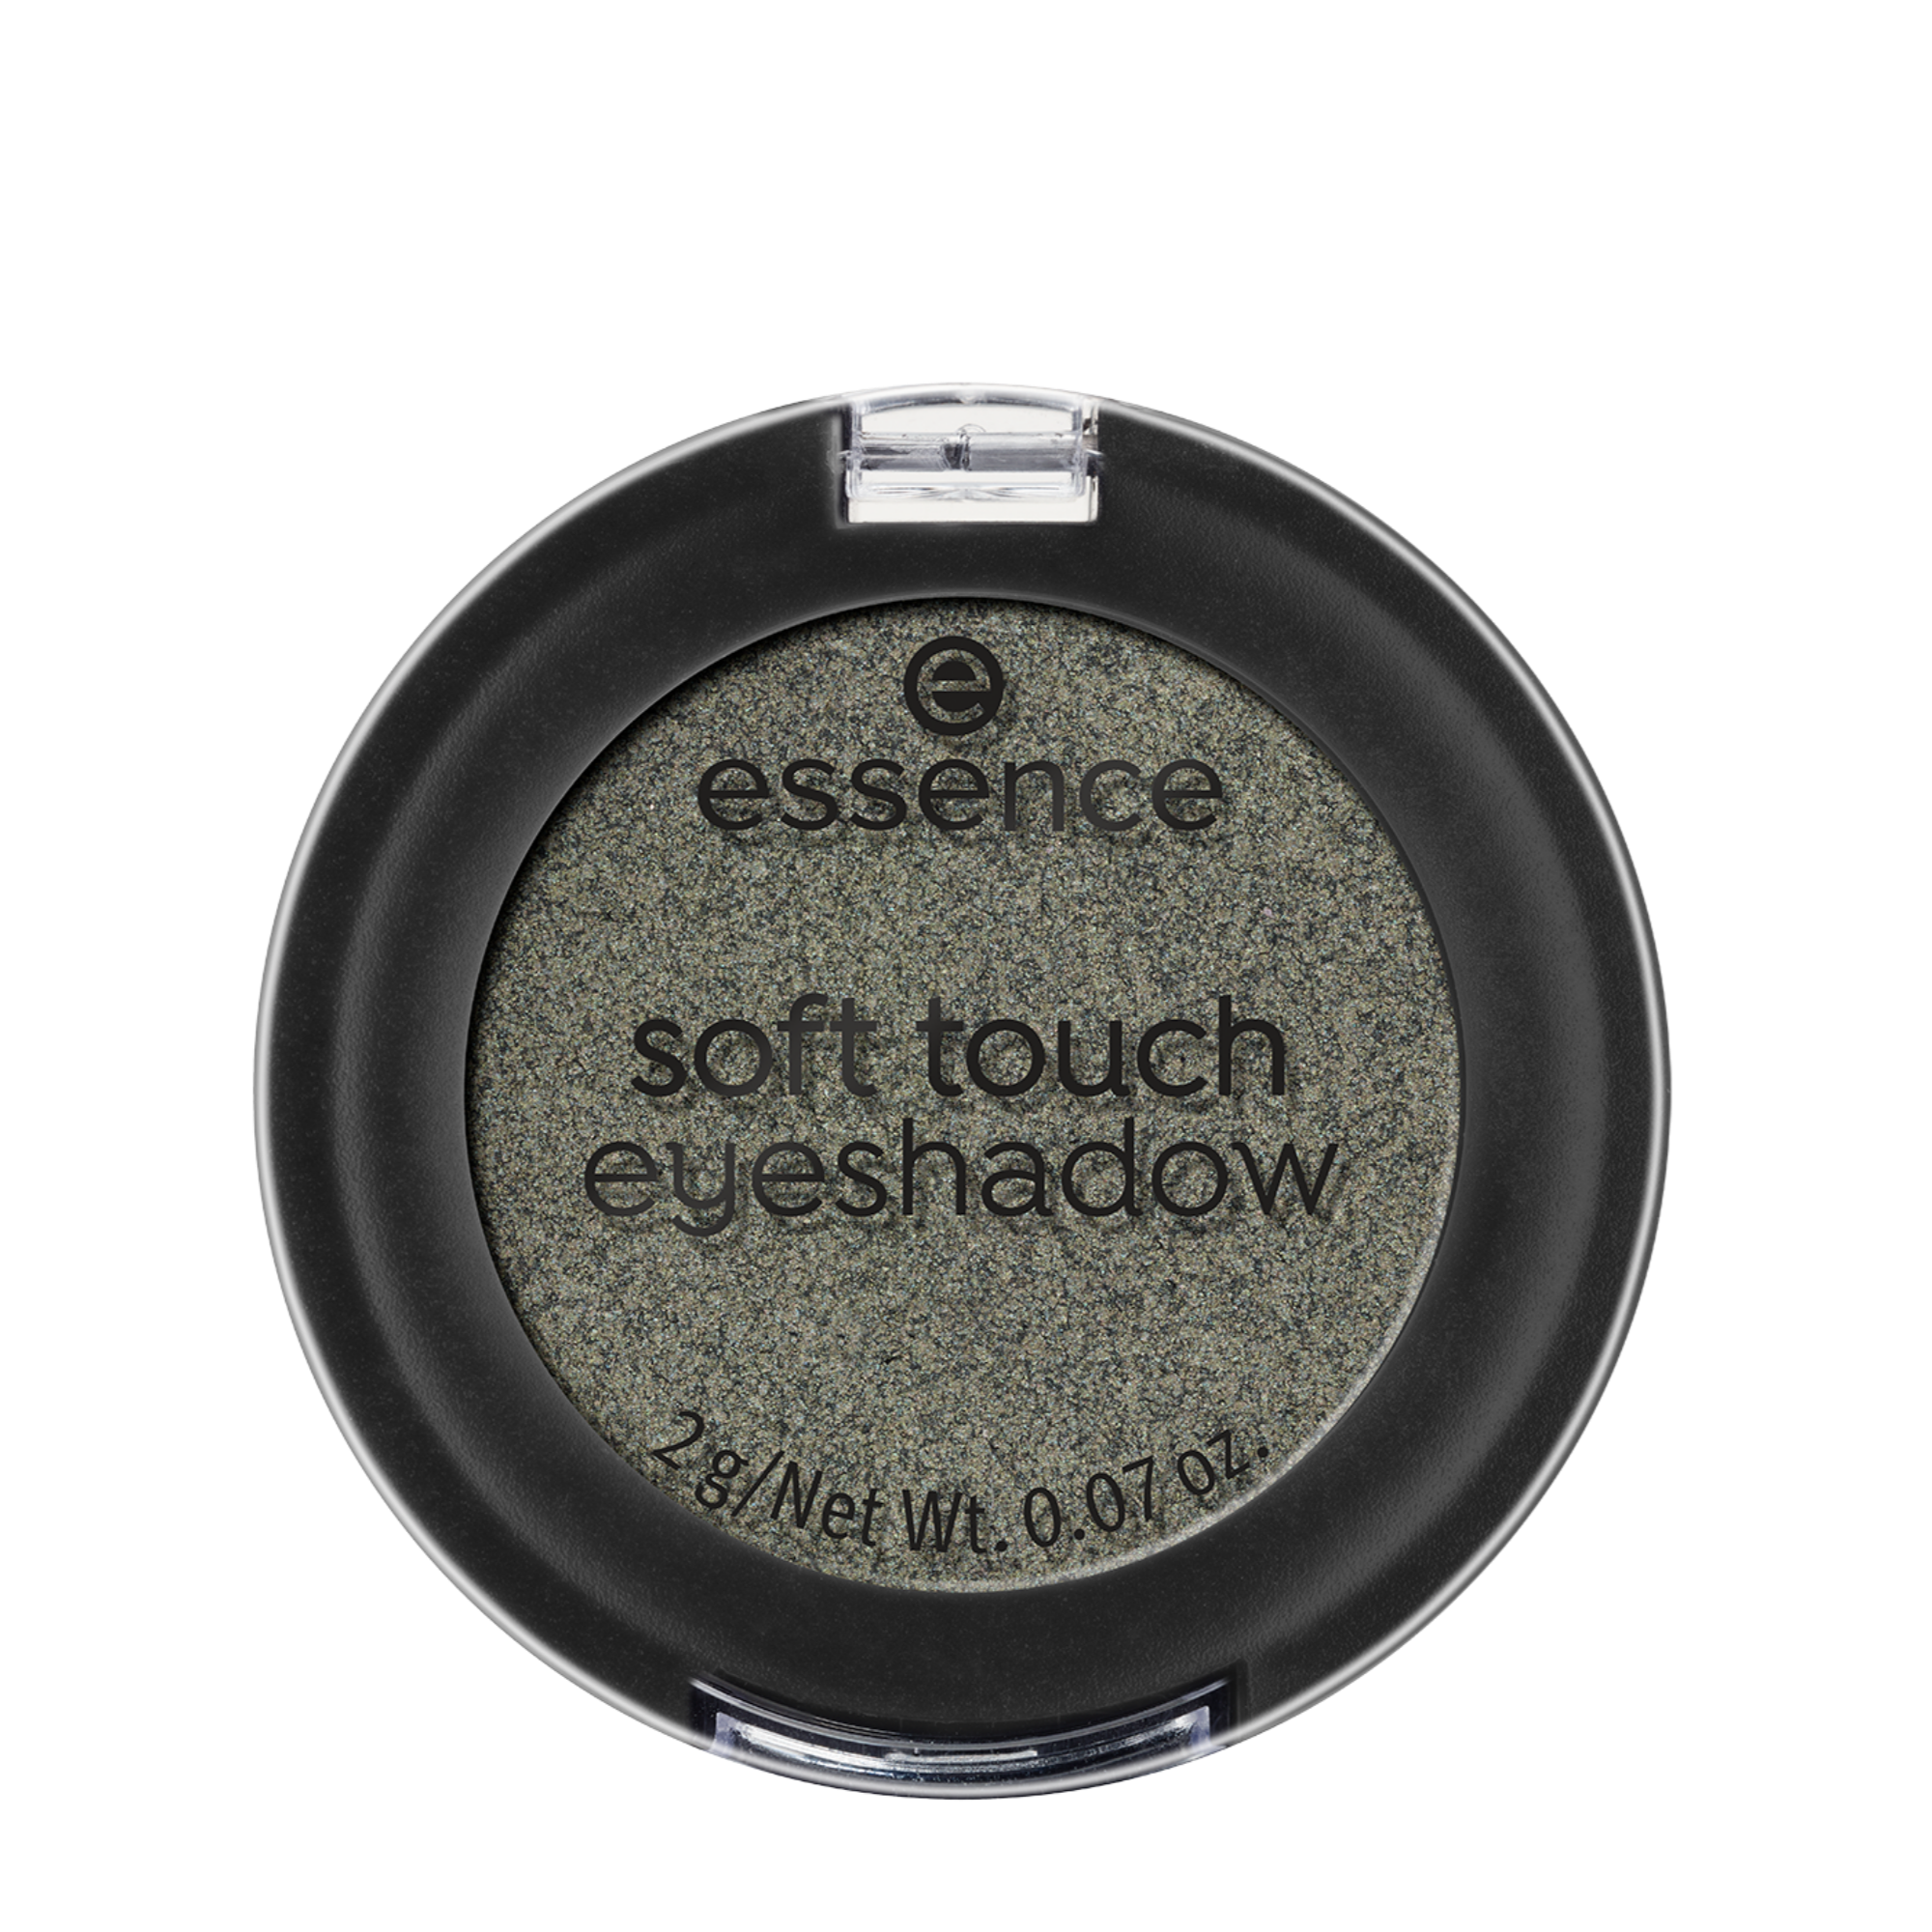 sombra de olhos soft touch